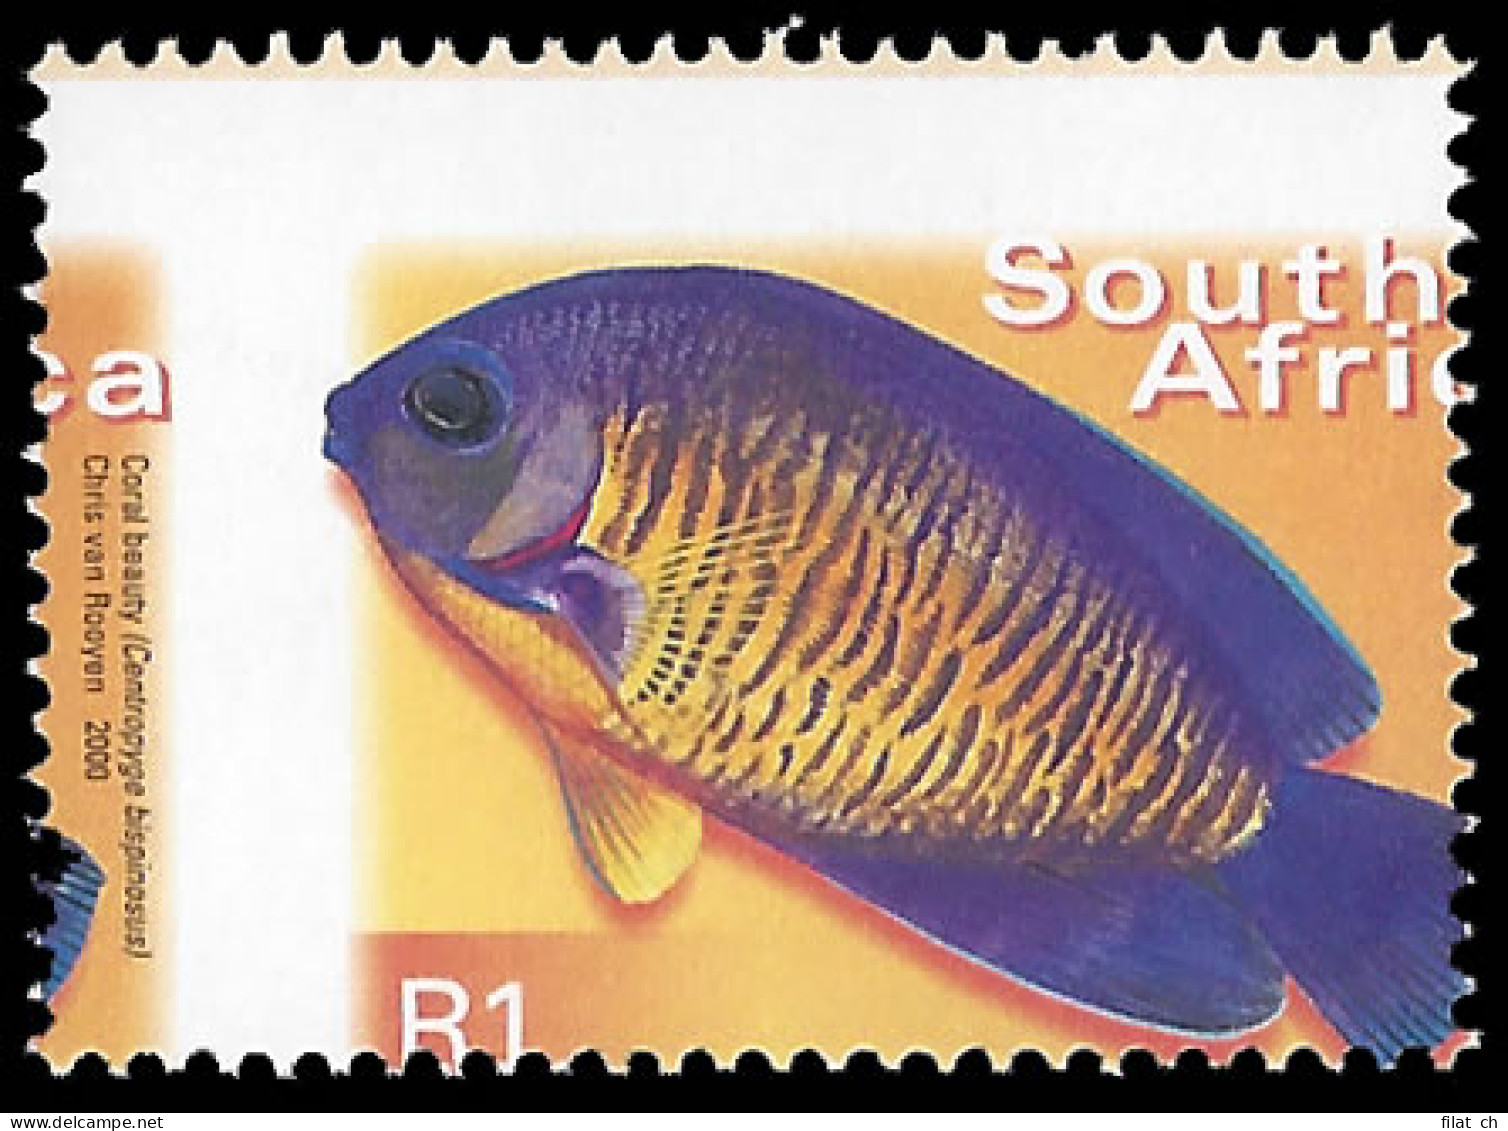 South Africa 2000 R1 Fish Grossly Misperforated UM  - Unclassified